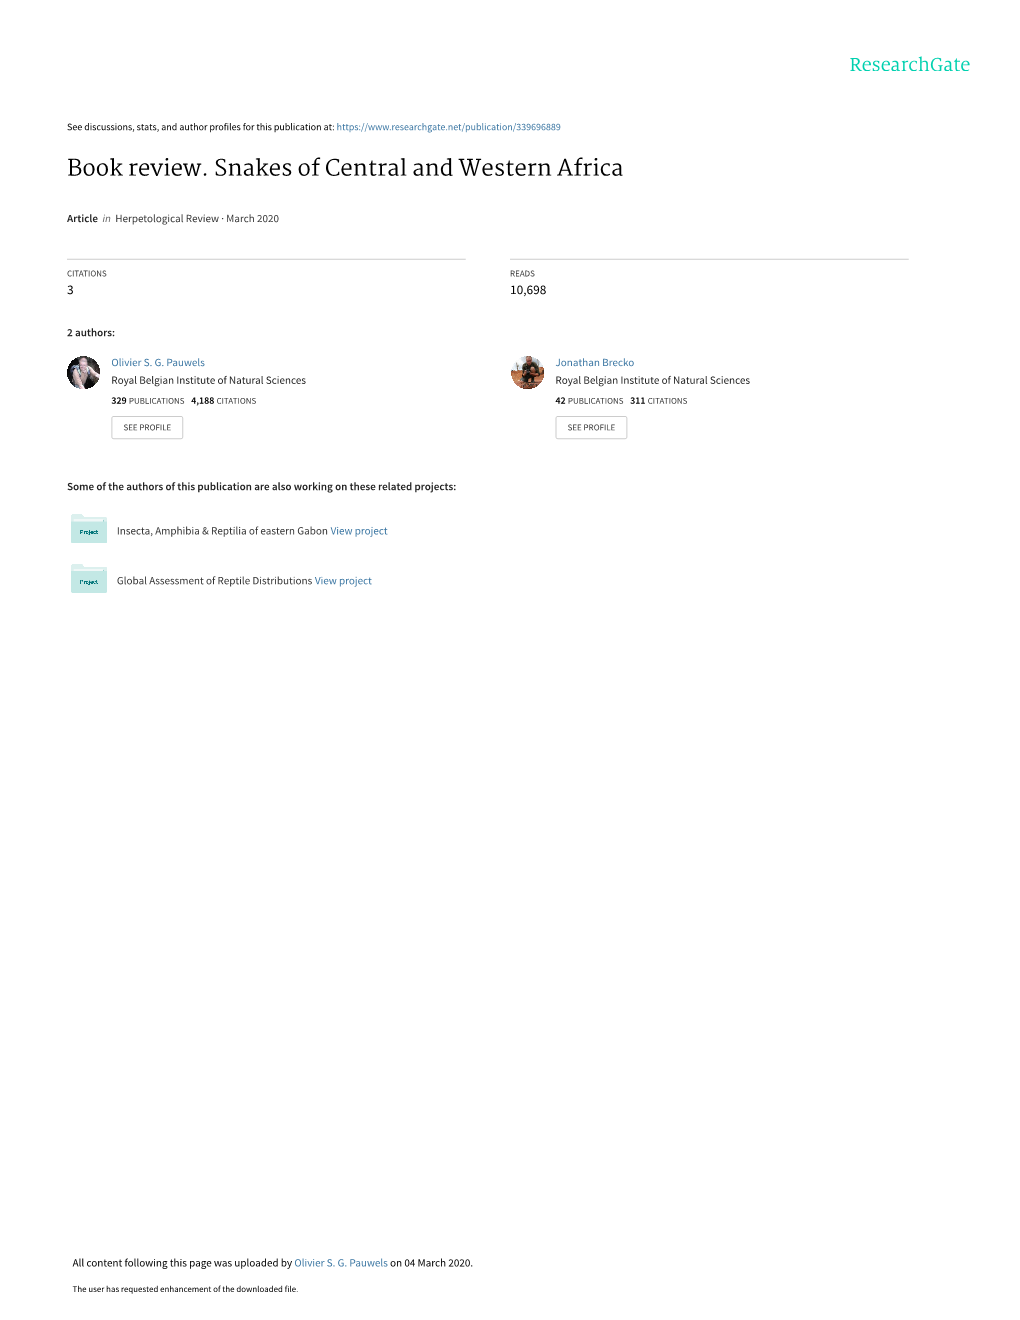 Book Review. Snakes of Central and Western Africa